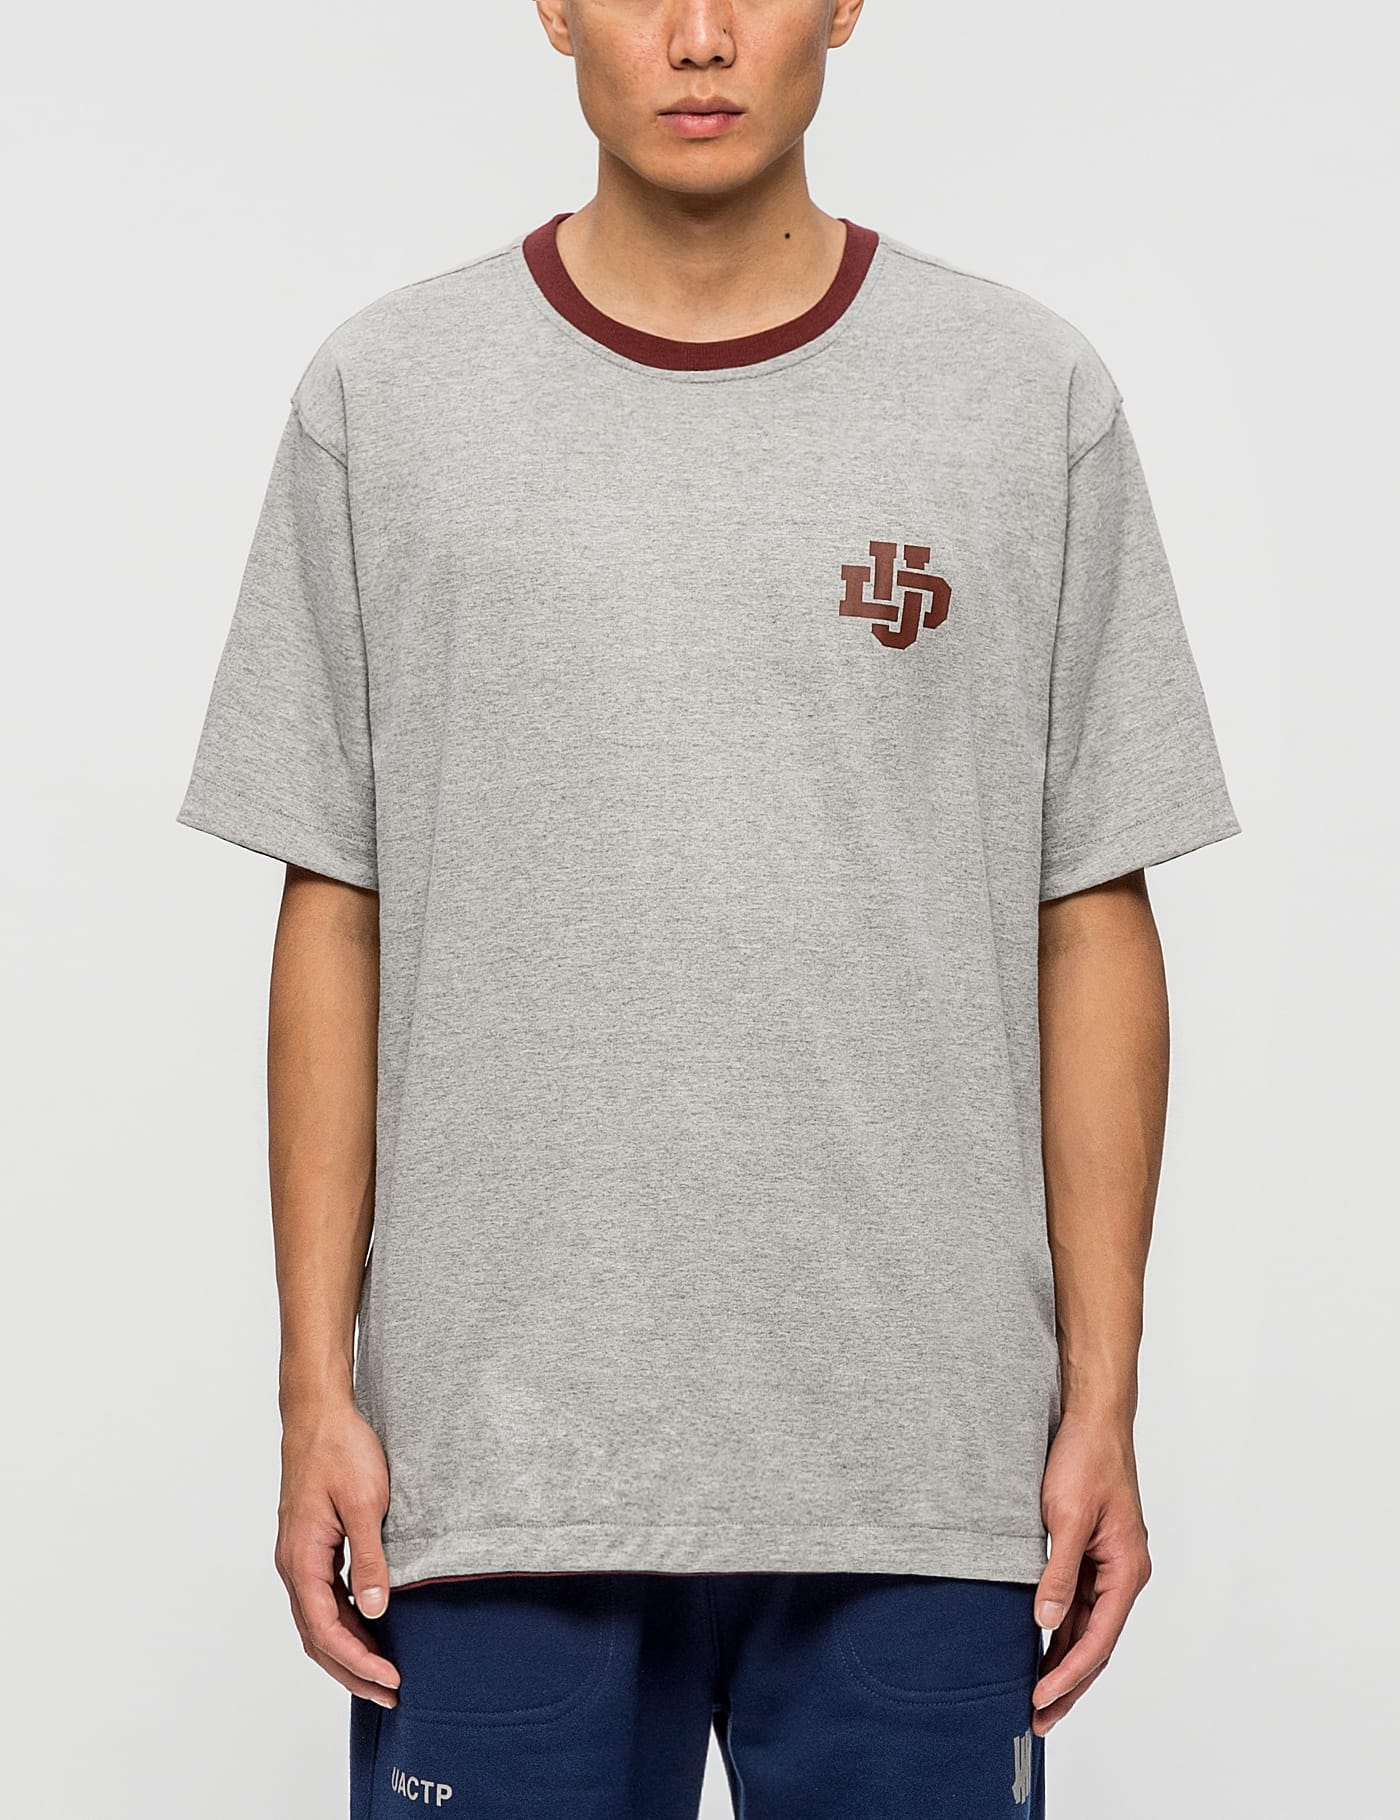 Undefeated - Reversible Crewneck T-Shirt | HBX - Globally Curated 